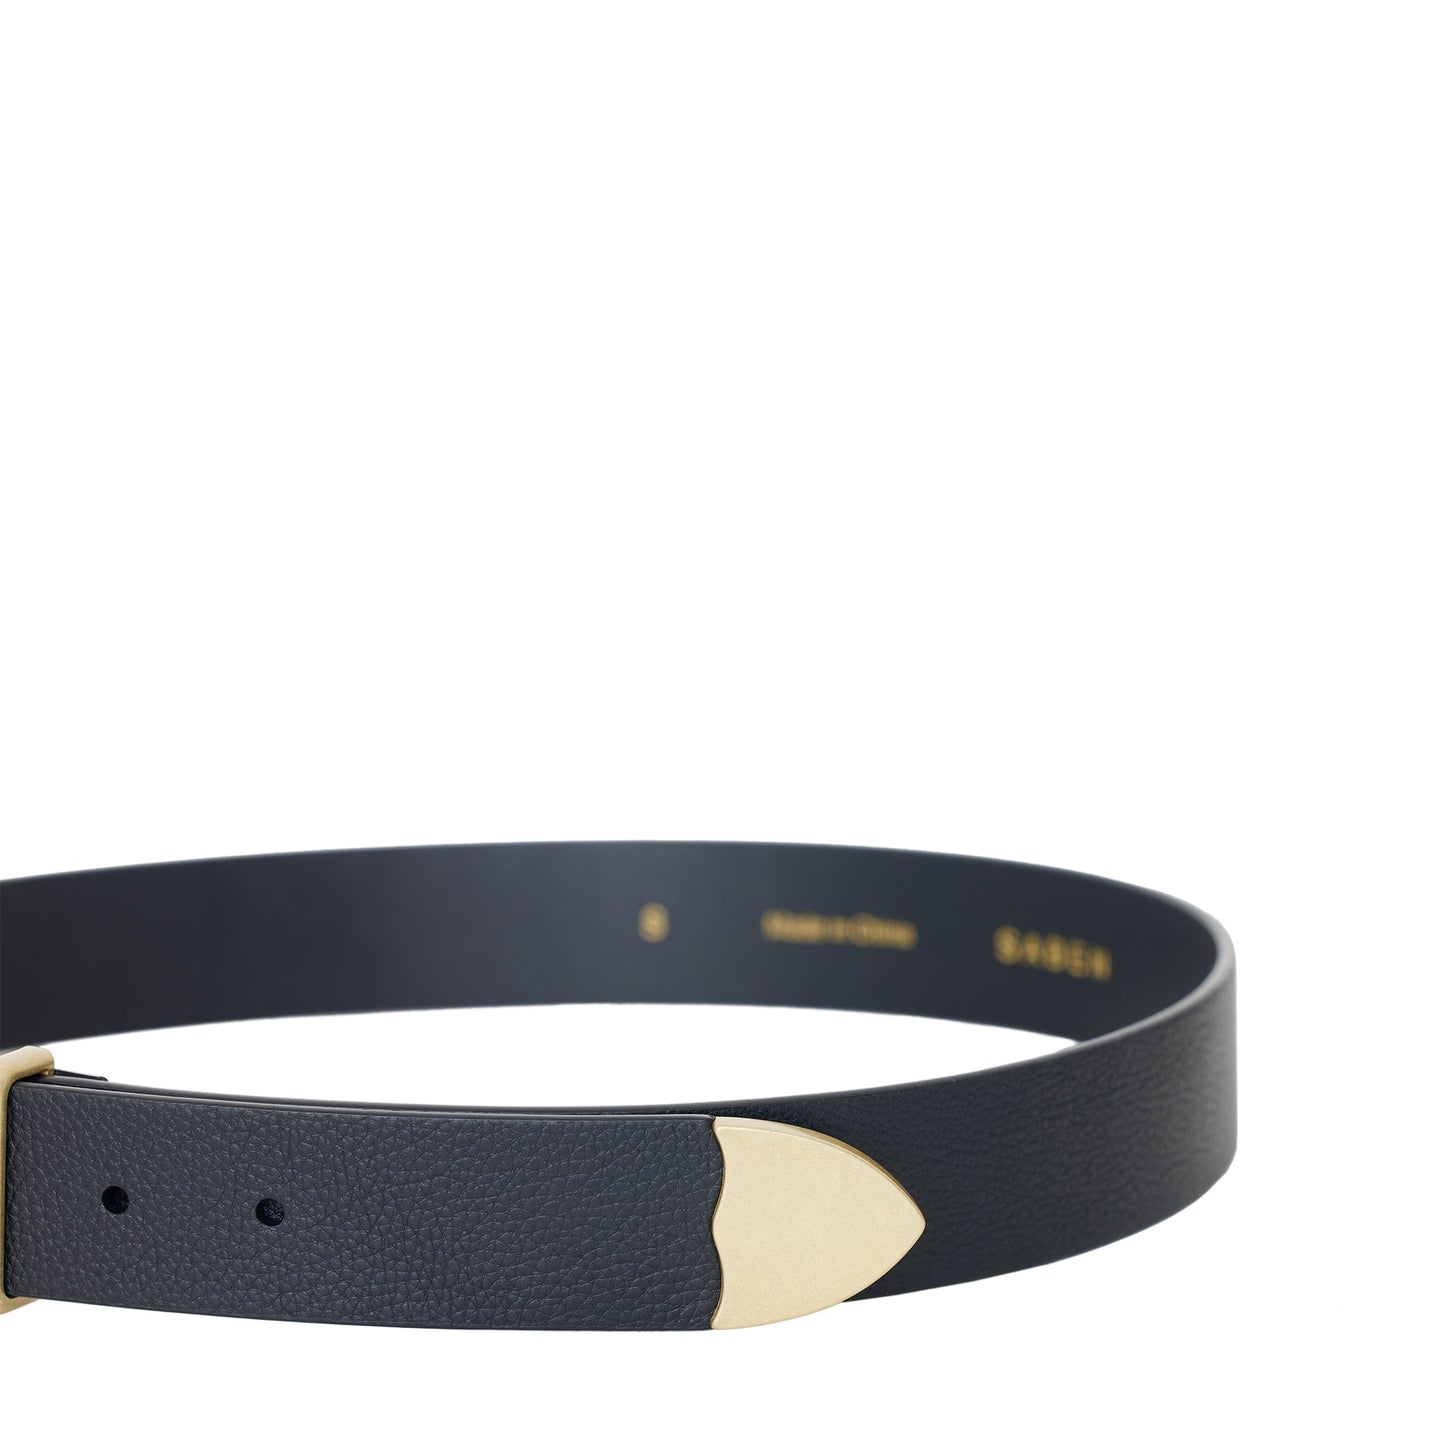 Cassidy Belt - Black and Gold